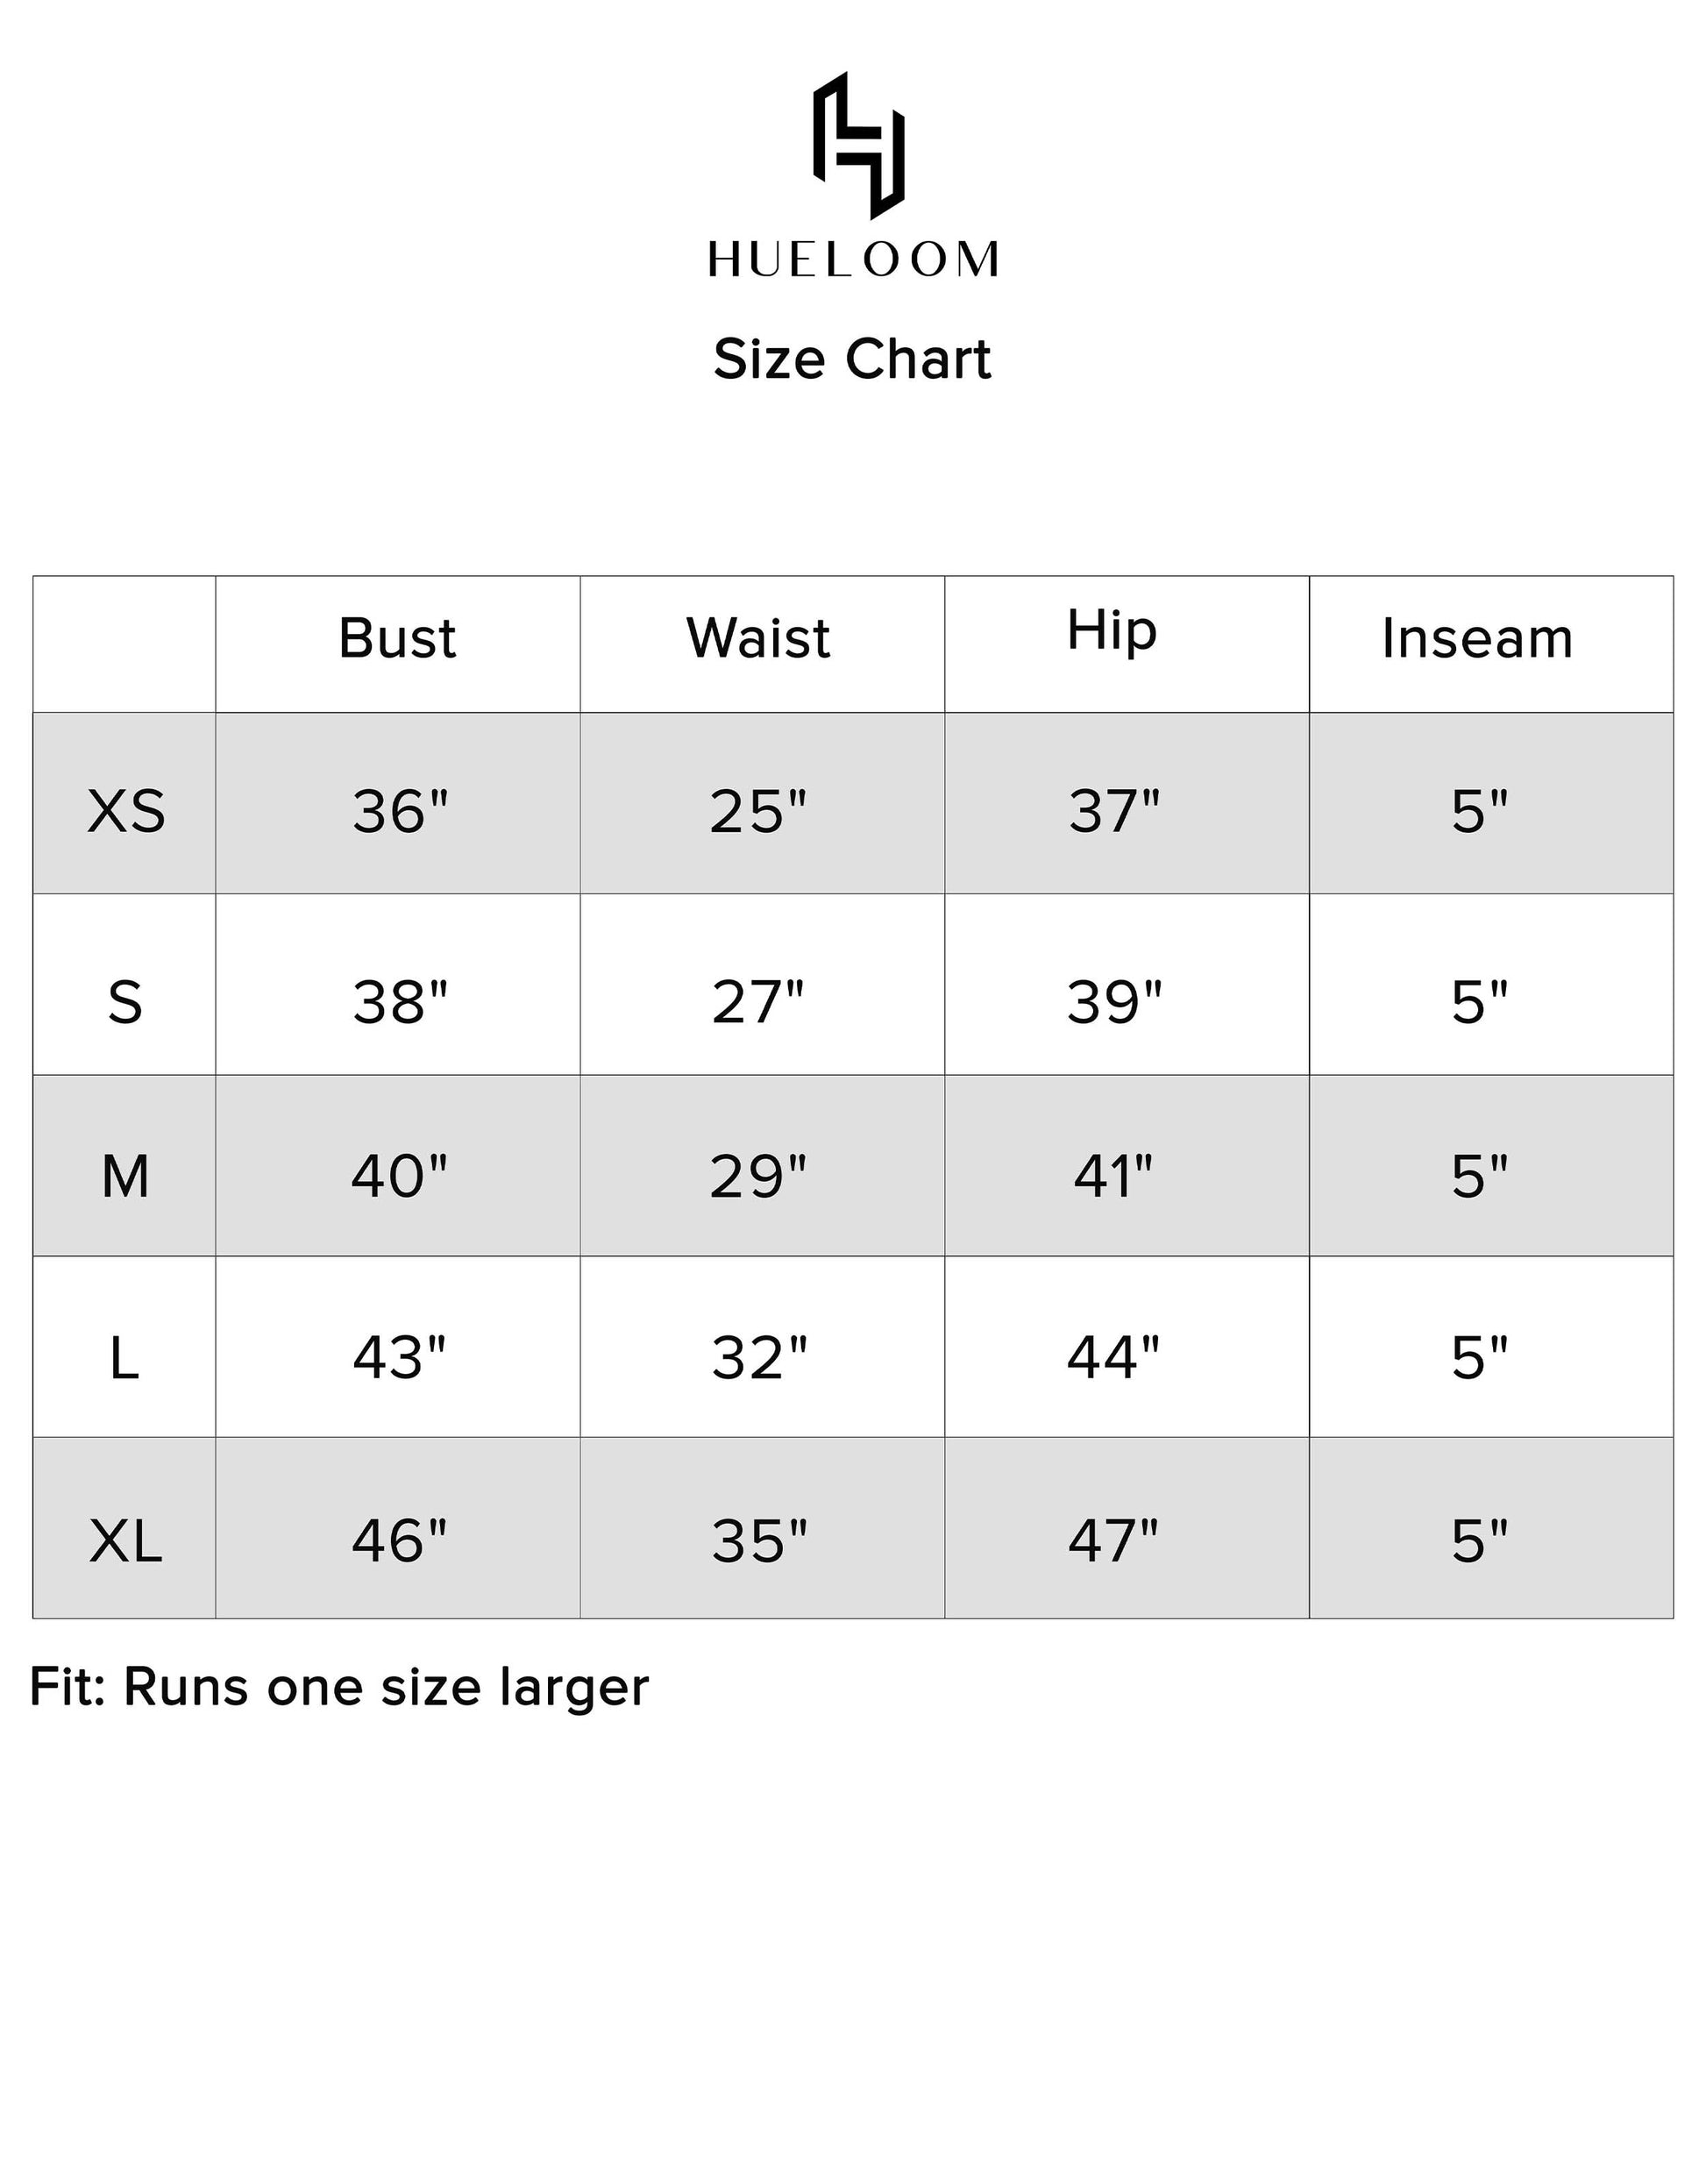 Hueloom Navy Printed Detachable Romper size chart display for accurate sizing.